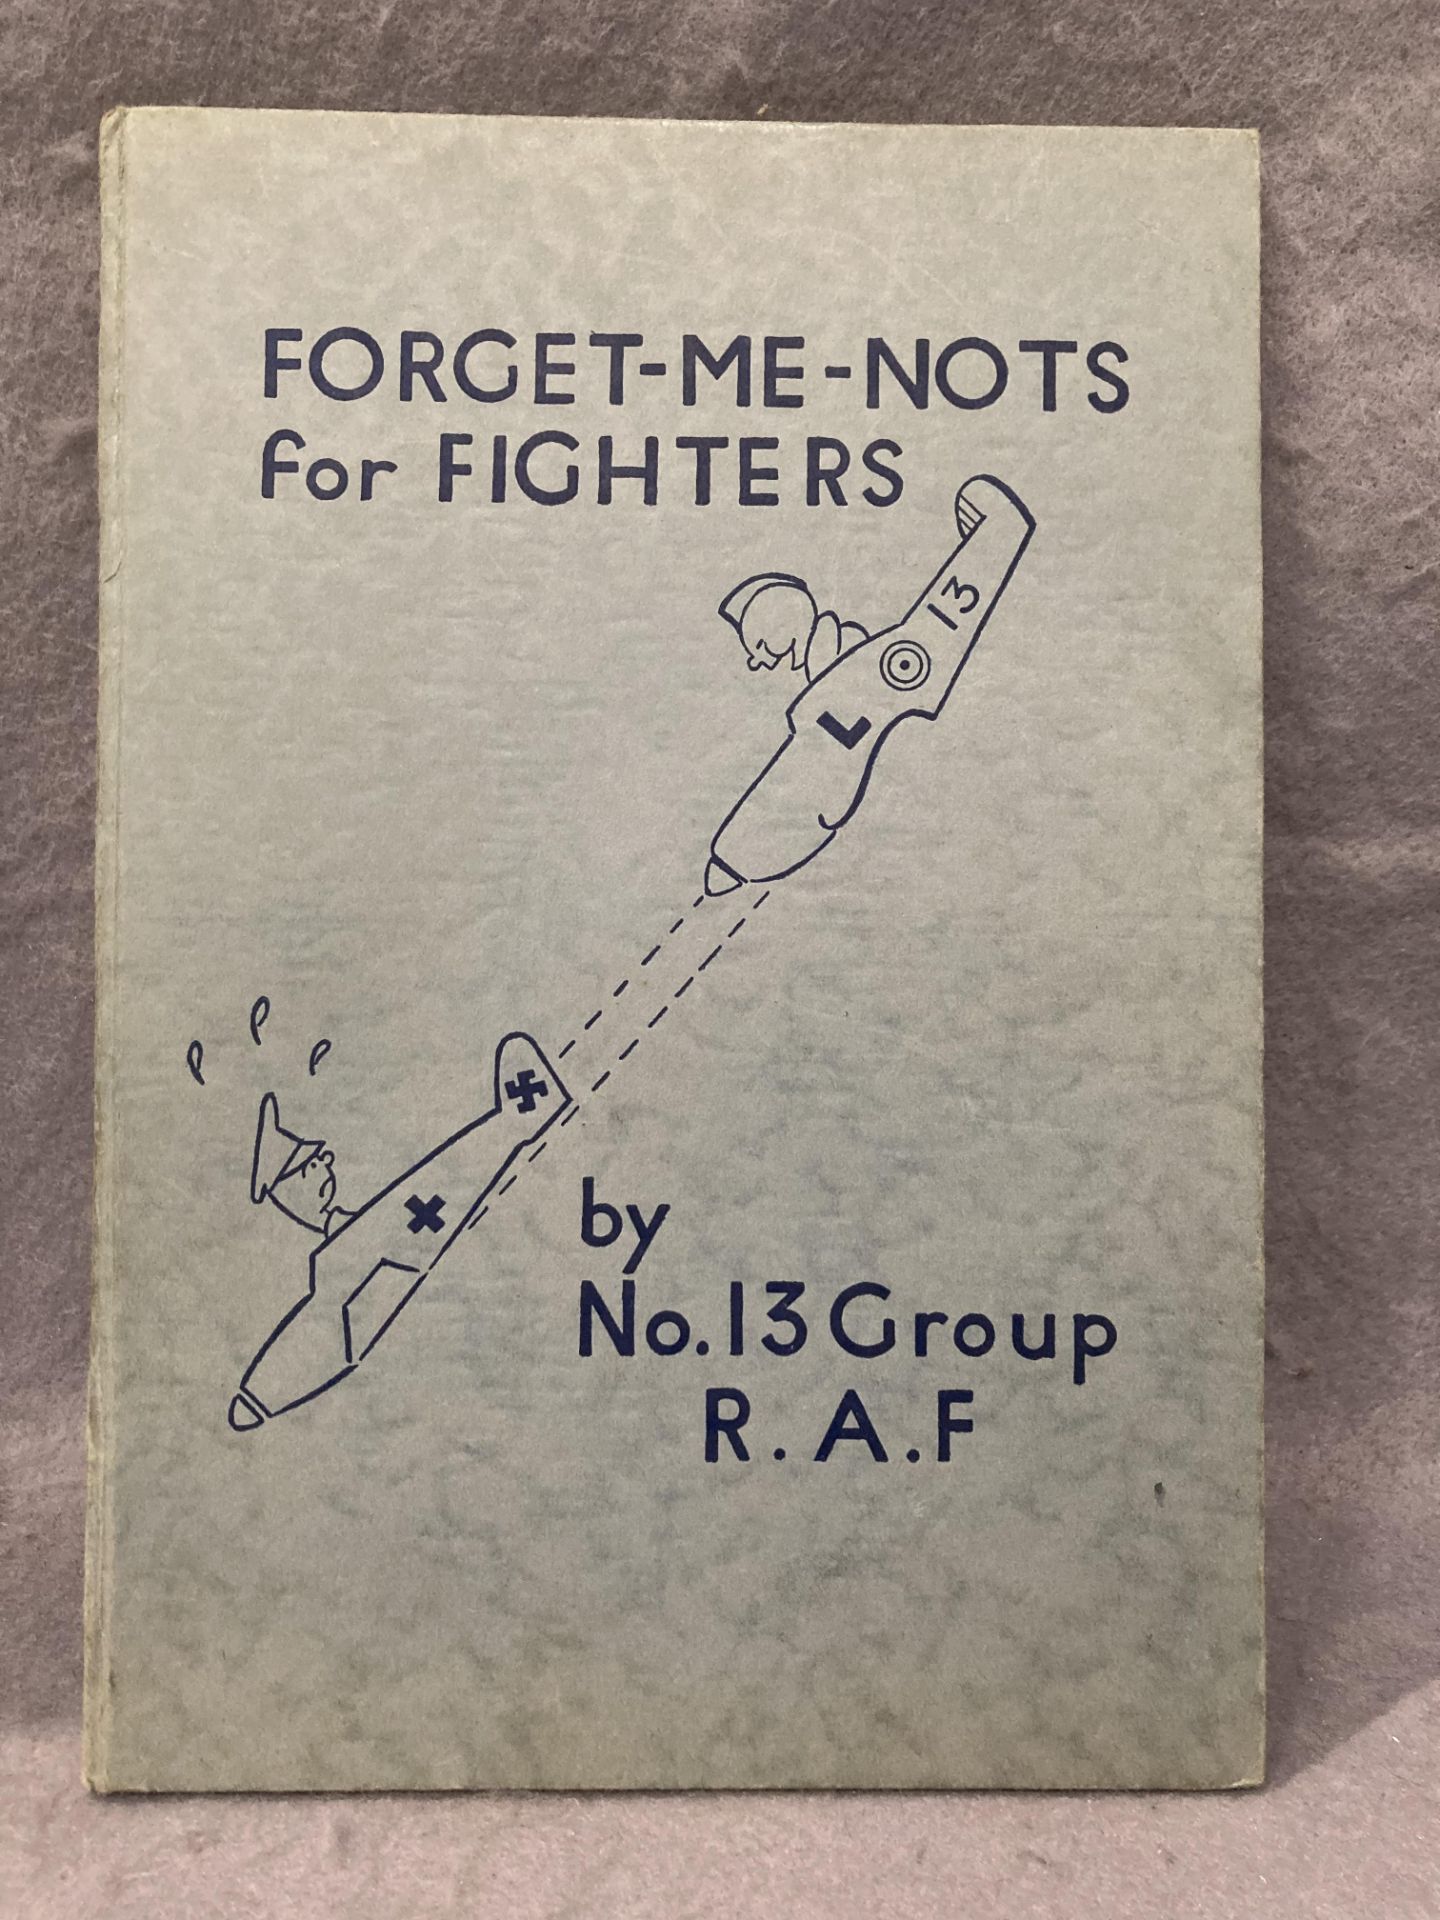 No 13 Group RAF 'Forget-Me-Nots for Fighters, first edition 1940, printed by Andrew Reid & Co. Ltd.